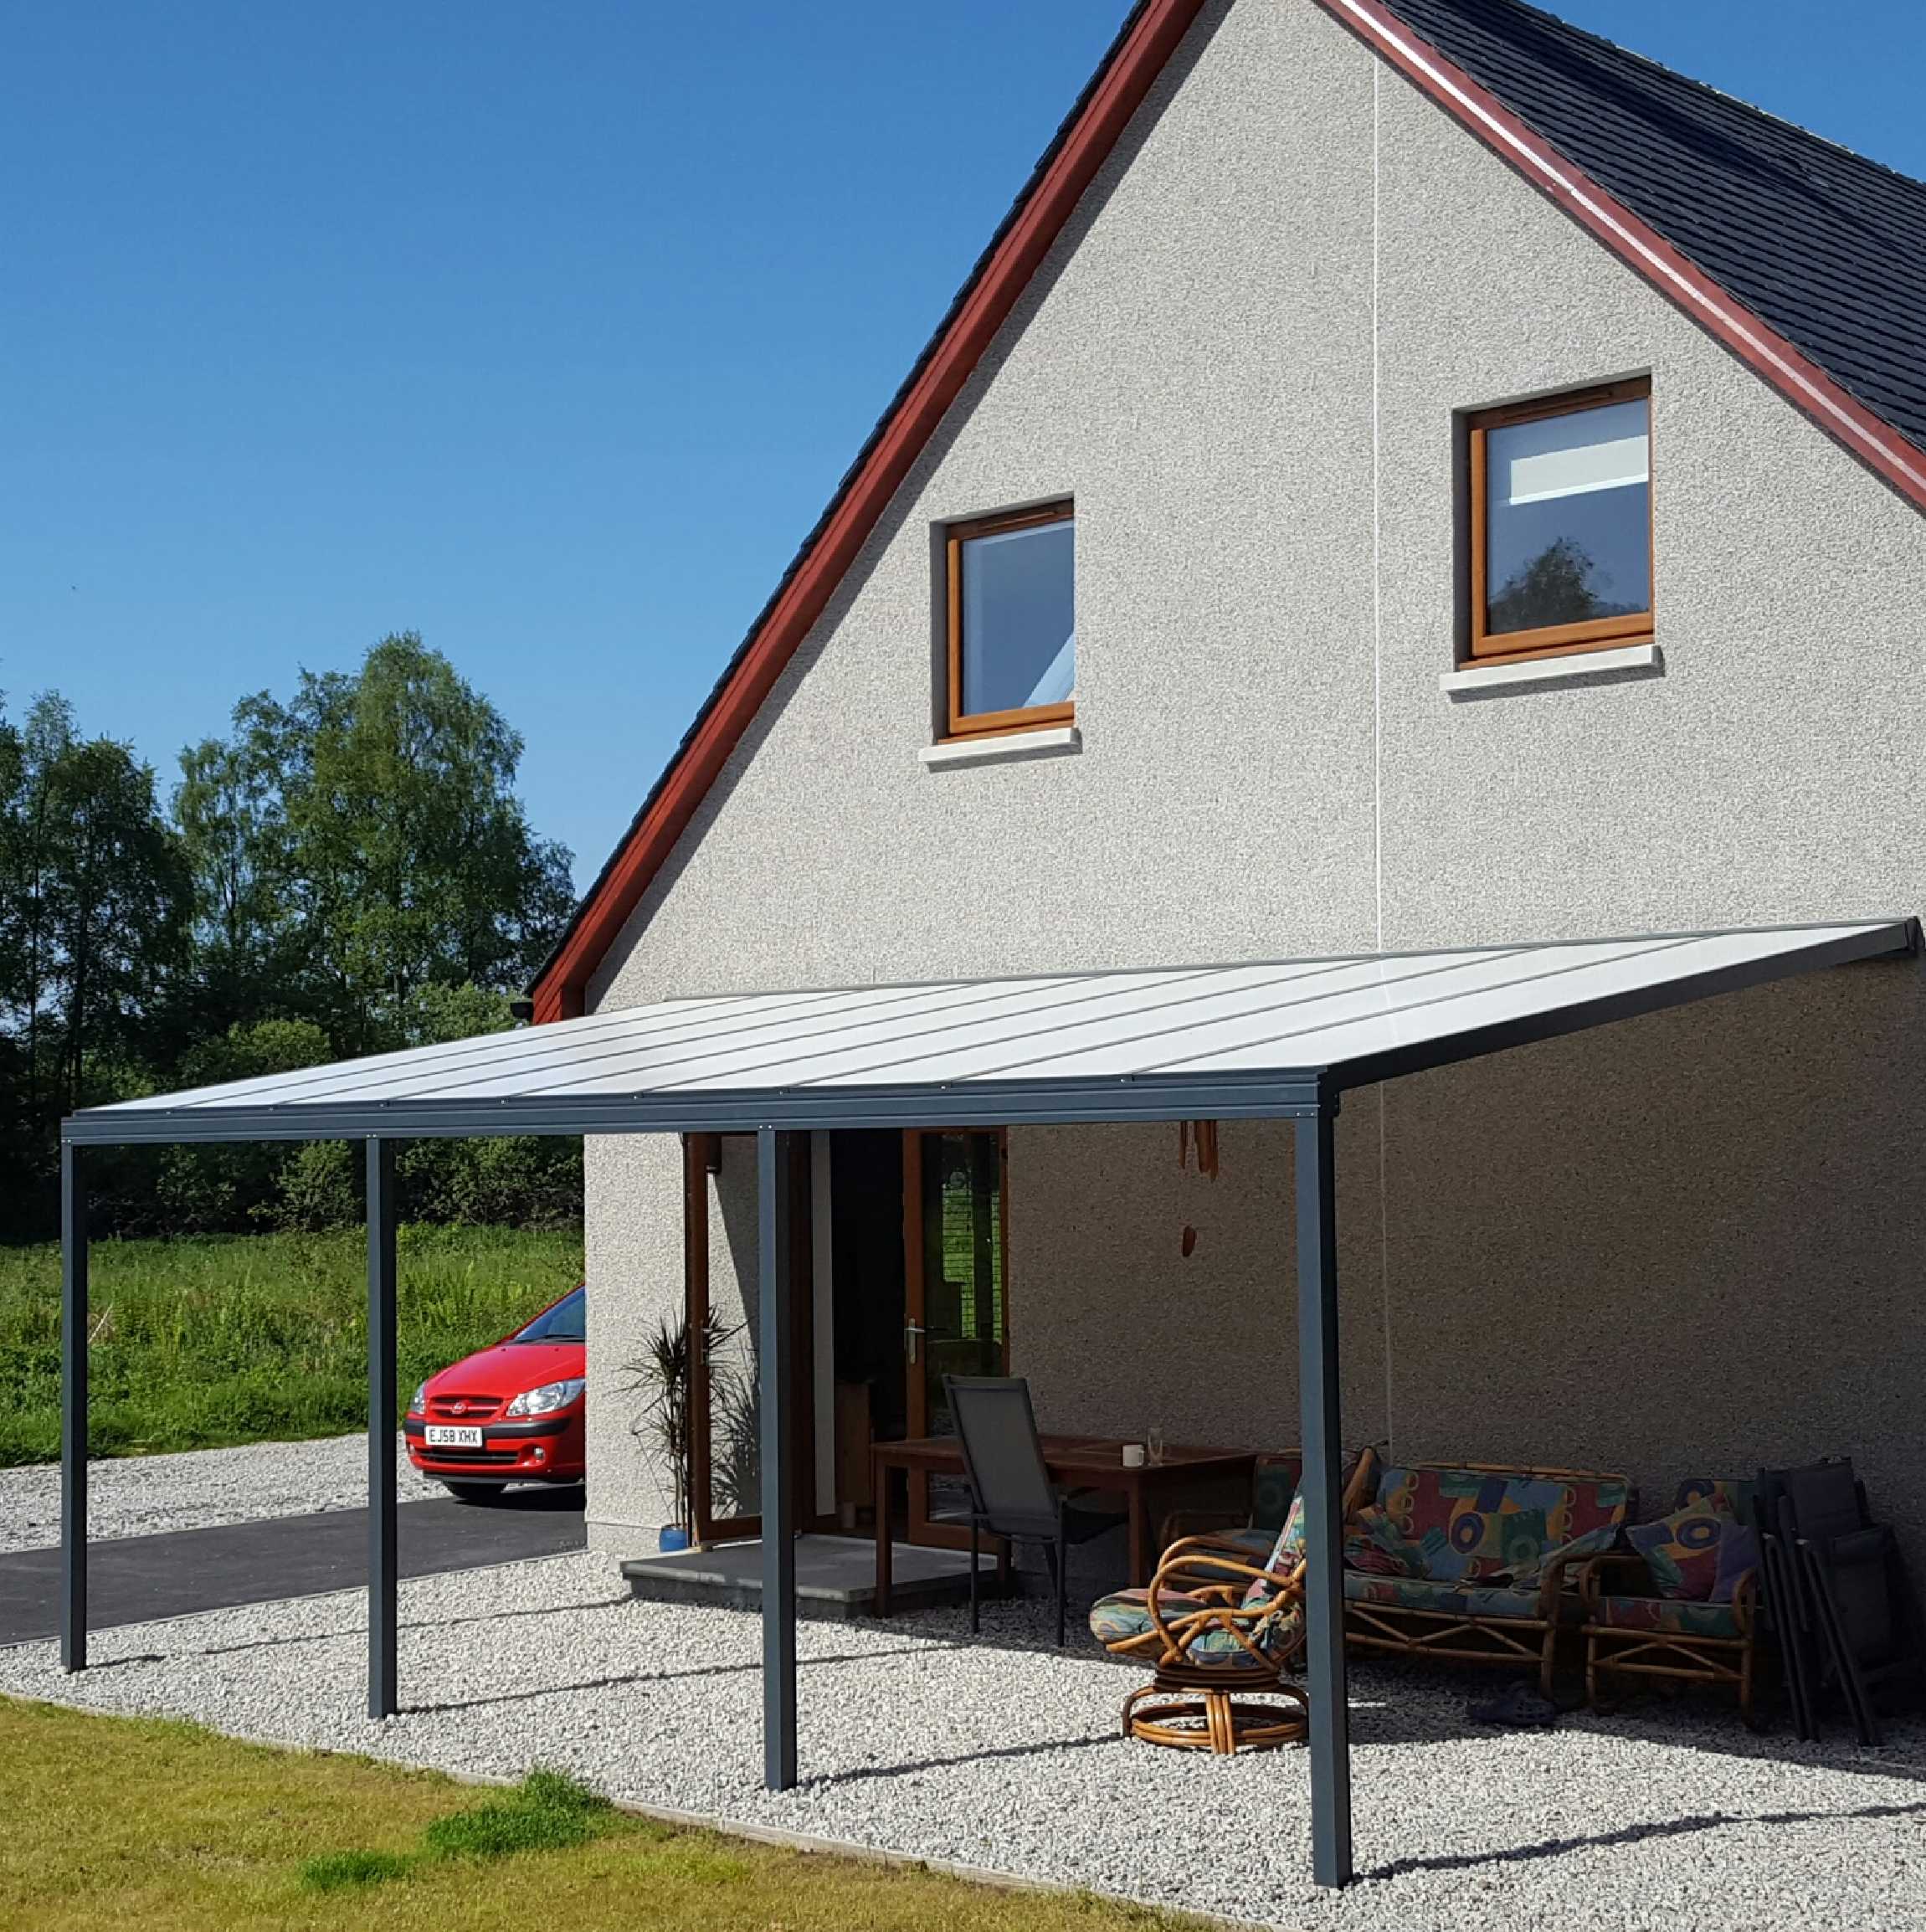 Great selection of SPECIAL OFFER Omega Smart Lean-To Canopy, Anthracite Grey, 16mm Polycarbonate Glazing - 3.1m (W) x 1.5m (P), (2) Supporting Posts